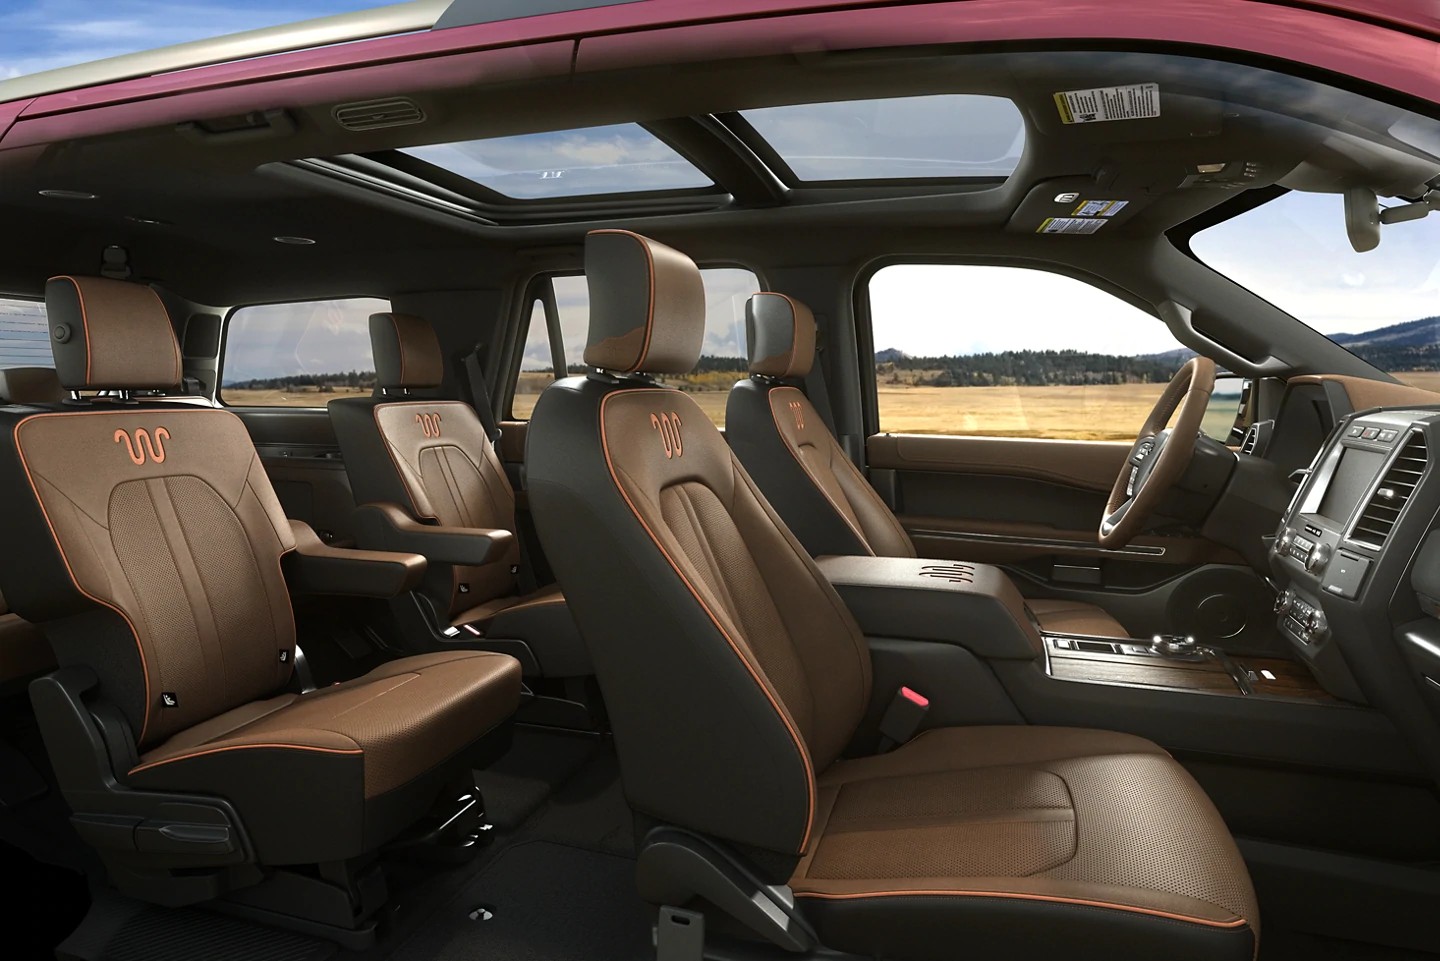 Spacious Seating in a Ford SUV